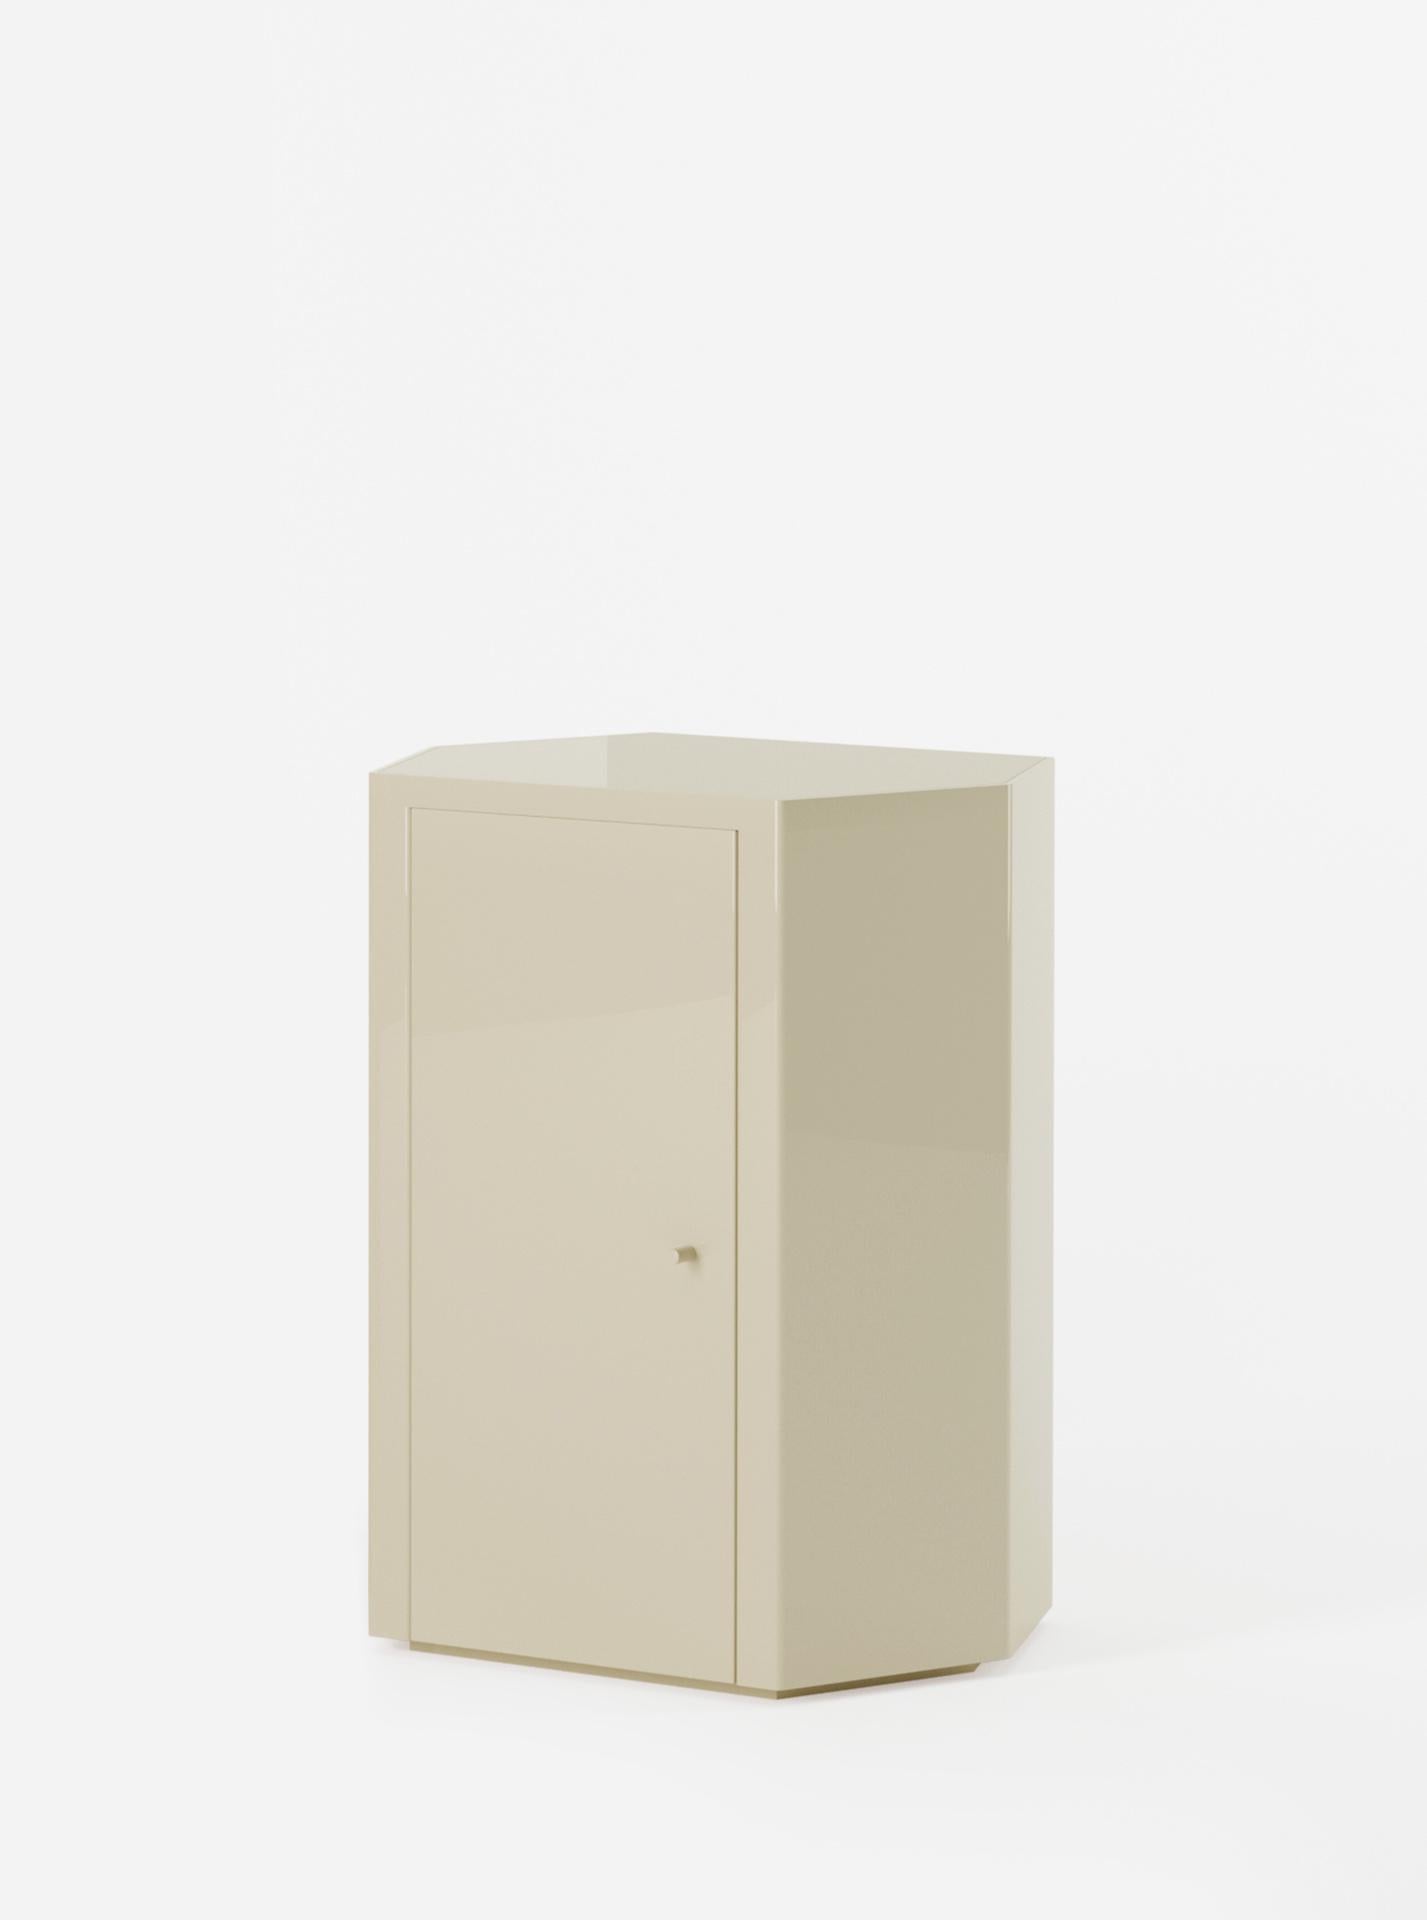 South African Pair of Park Night Stands in Butter Cream Lacquer by Yaniv Chen for Lemon For Sale